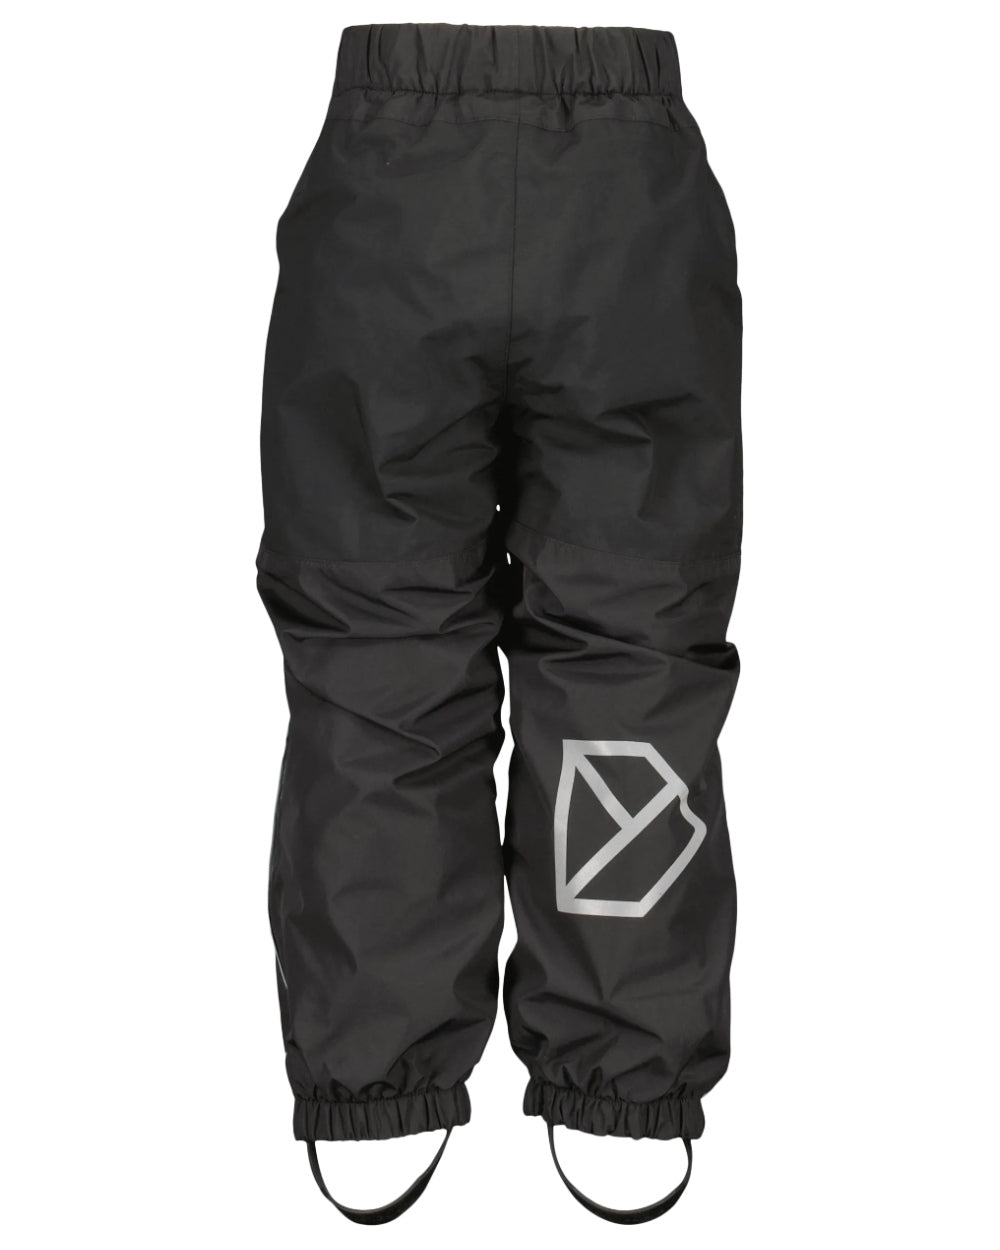 Black Coloured Didriksons Narvi Childrens Pant On A White Background 